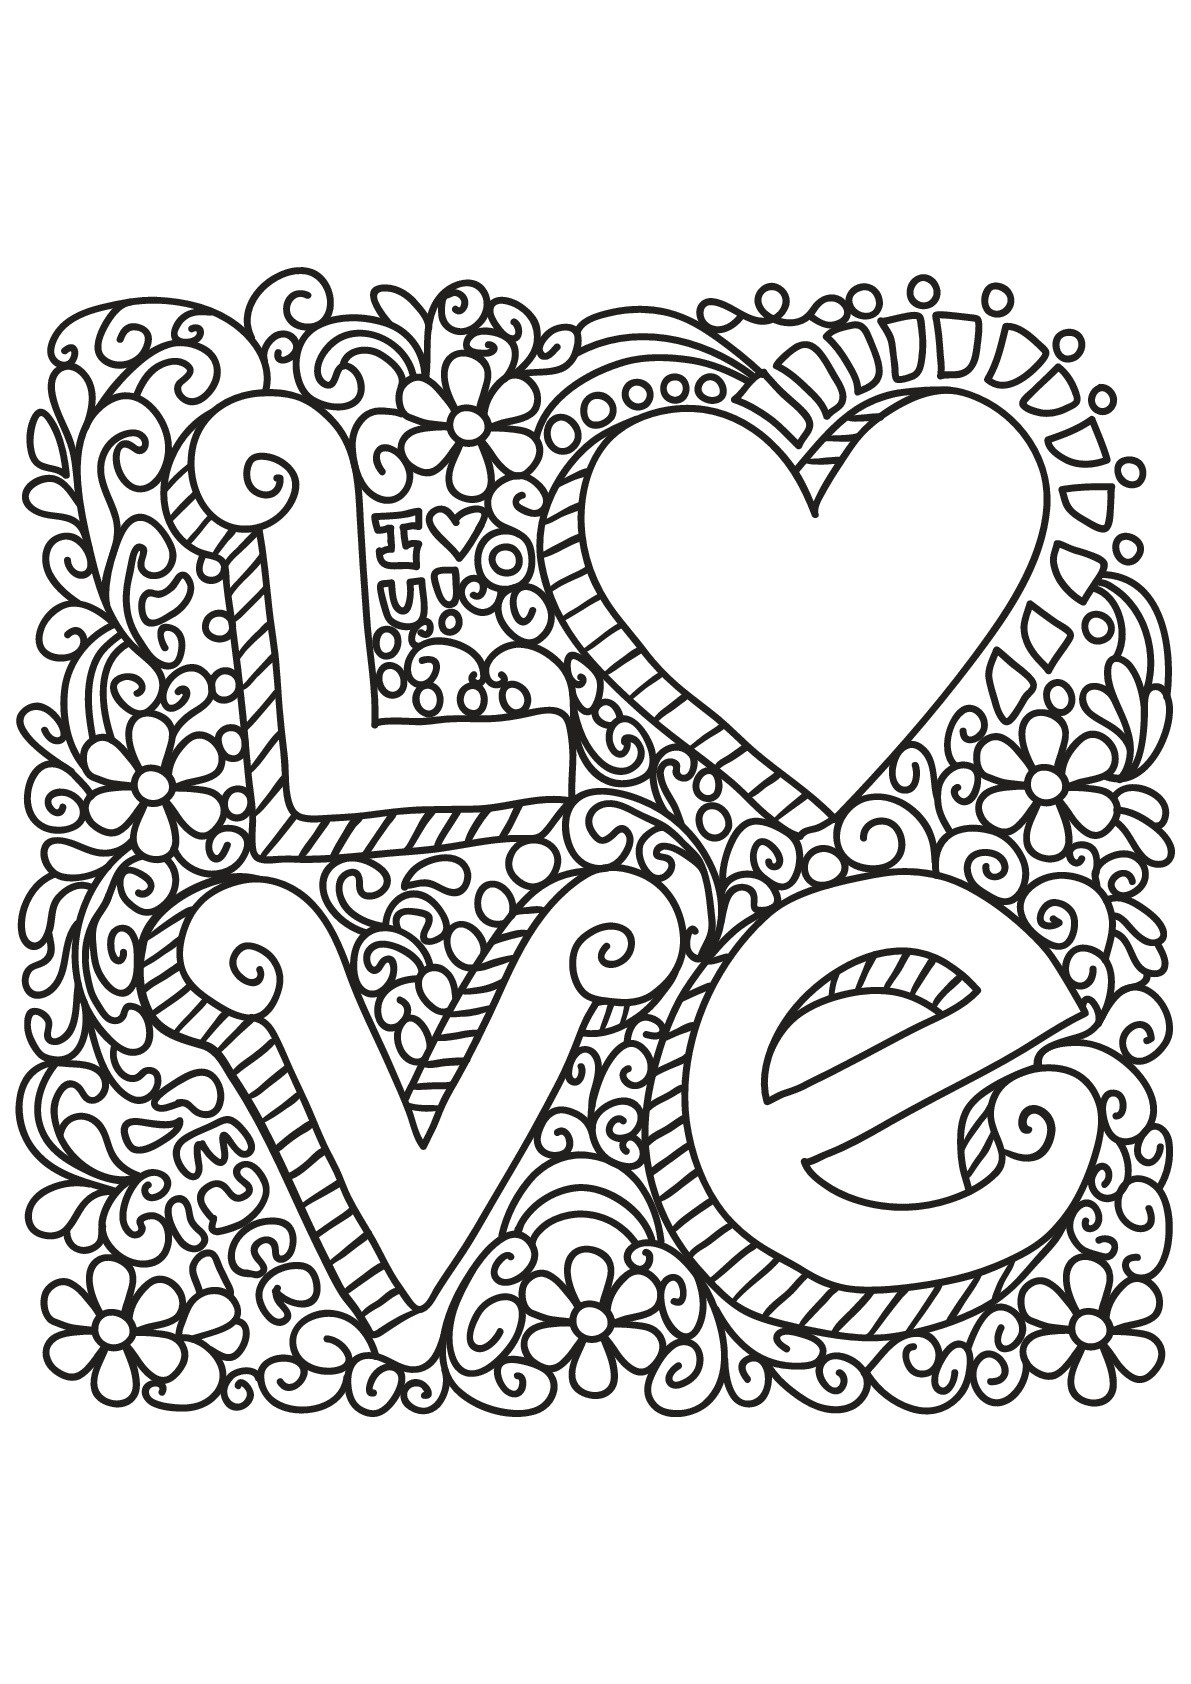 Adult Coloring Pages Quotes
 Free book quote 2 Quotes Adult Coloring Pages